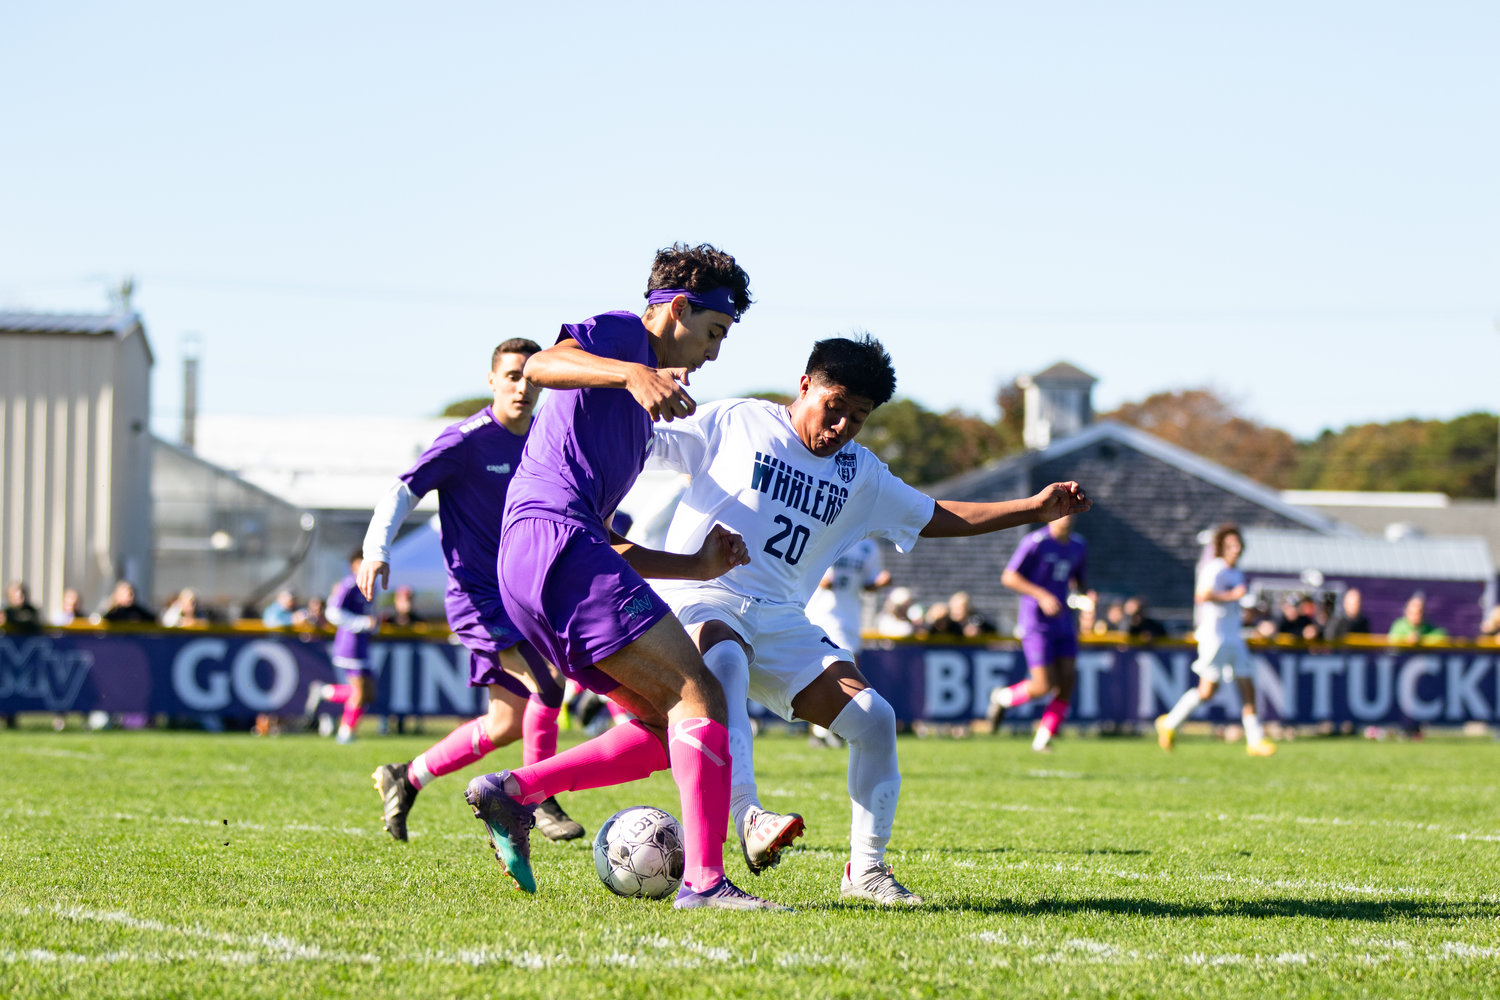 Ericson Yonilson battles for possession against a Vineyard player in Saturday’s 3-0 loss.